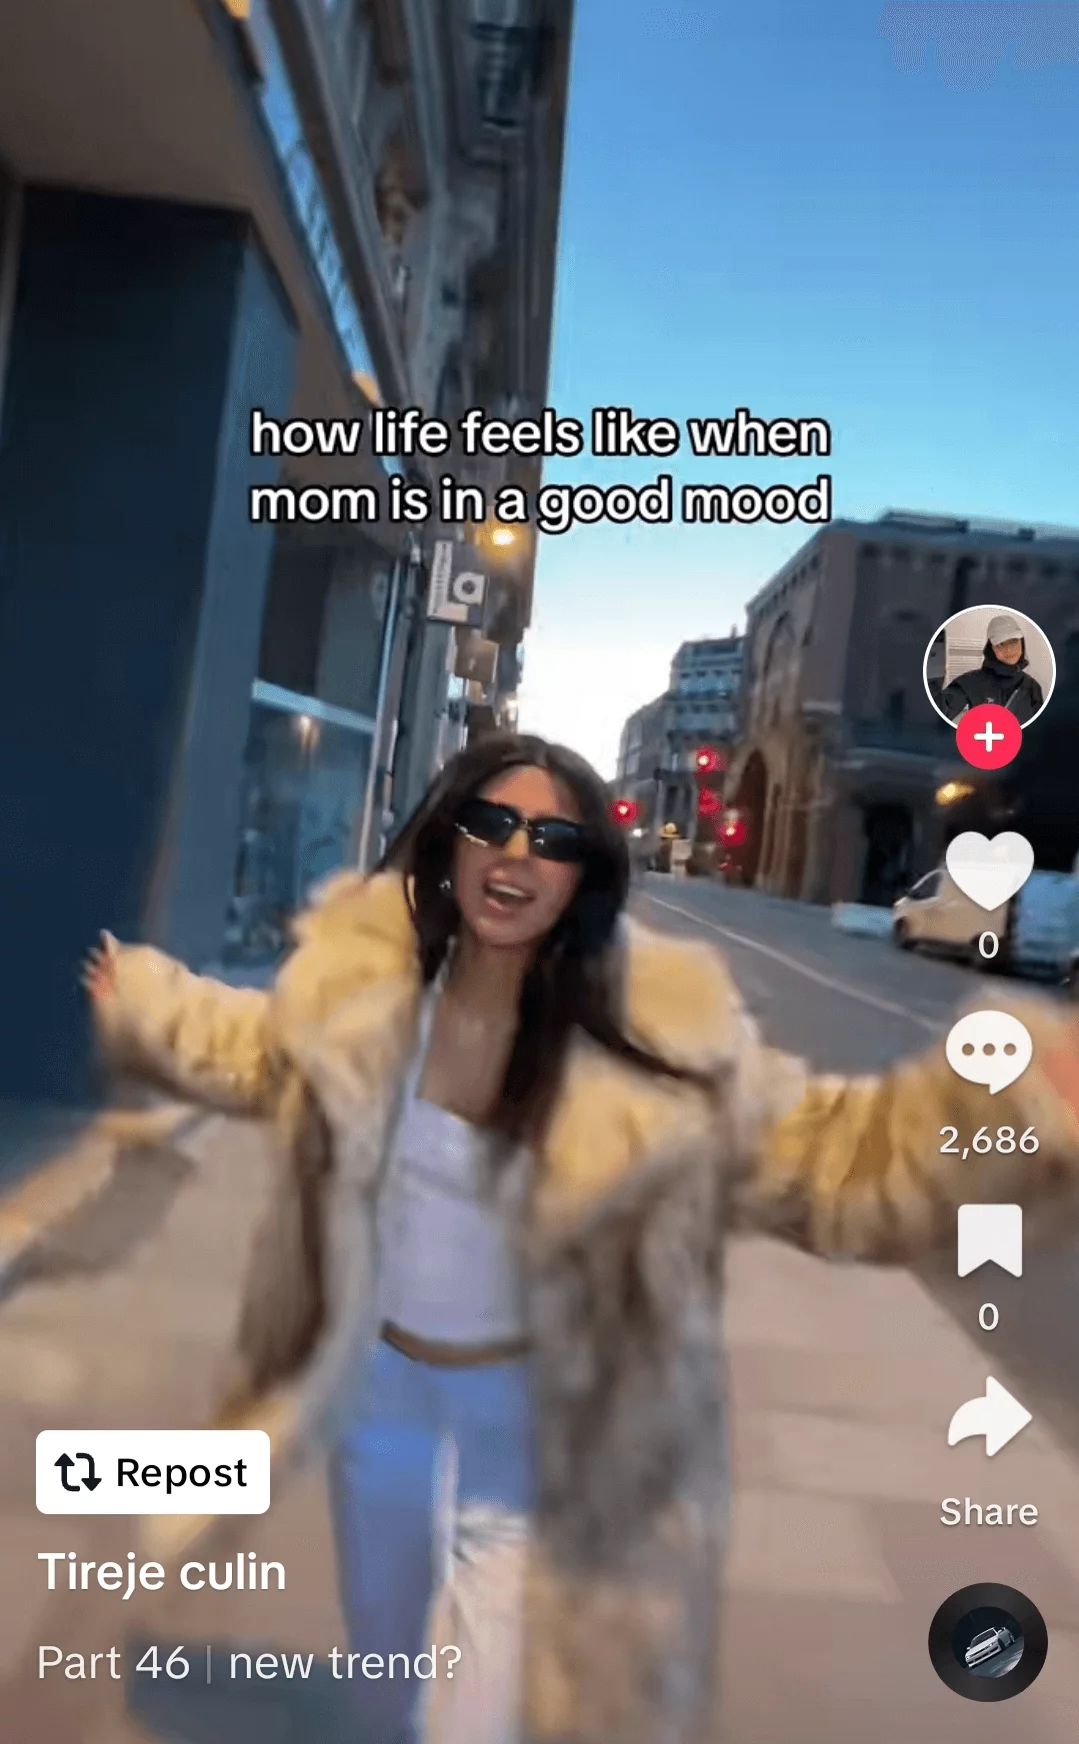 Joyful young woman in sunglasses and a fur coat, celebrating on a city street, captured in a lively social media video post.